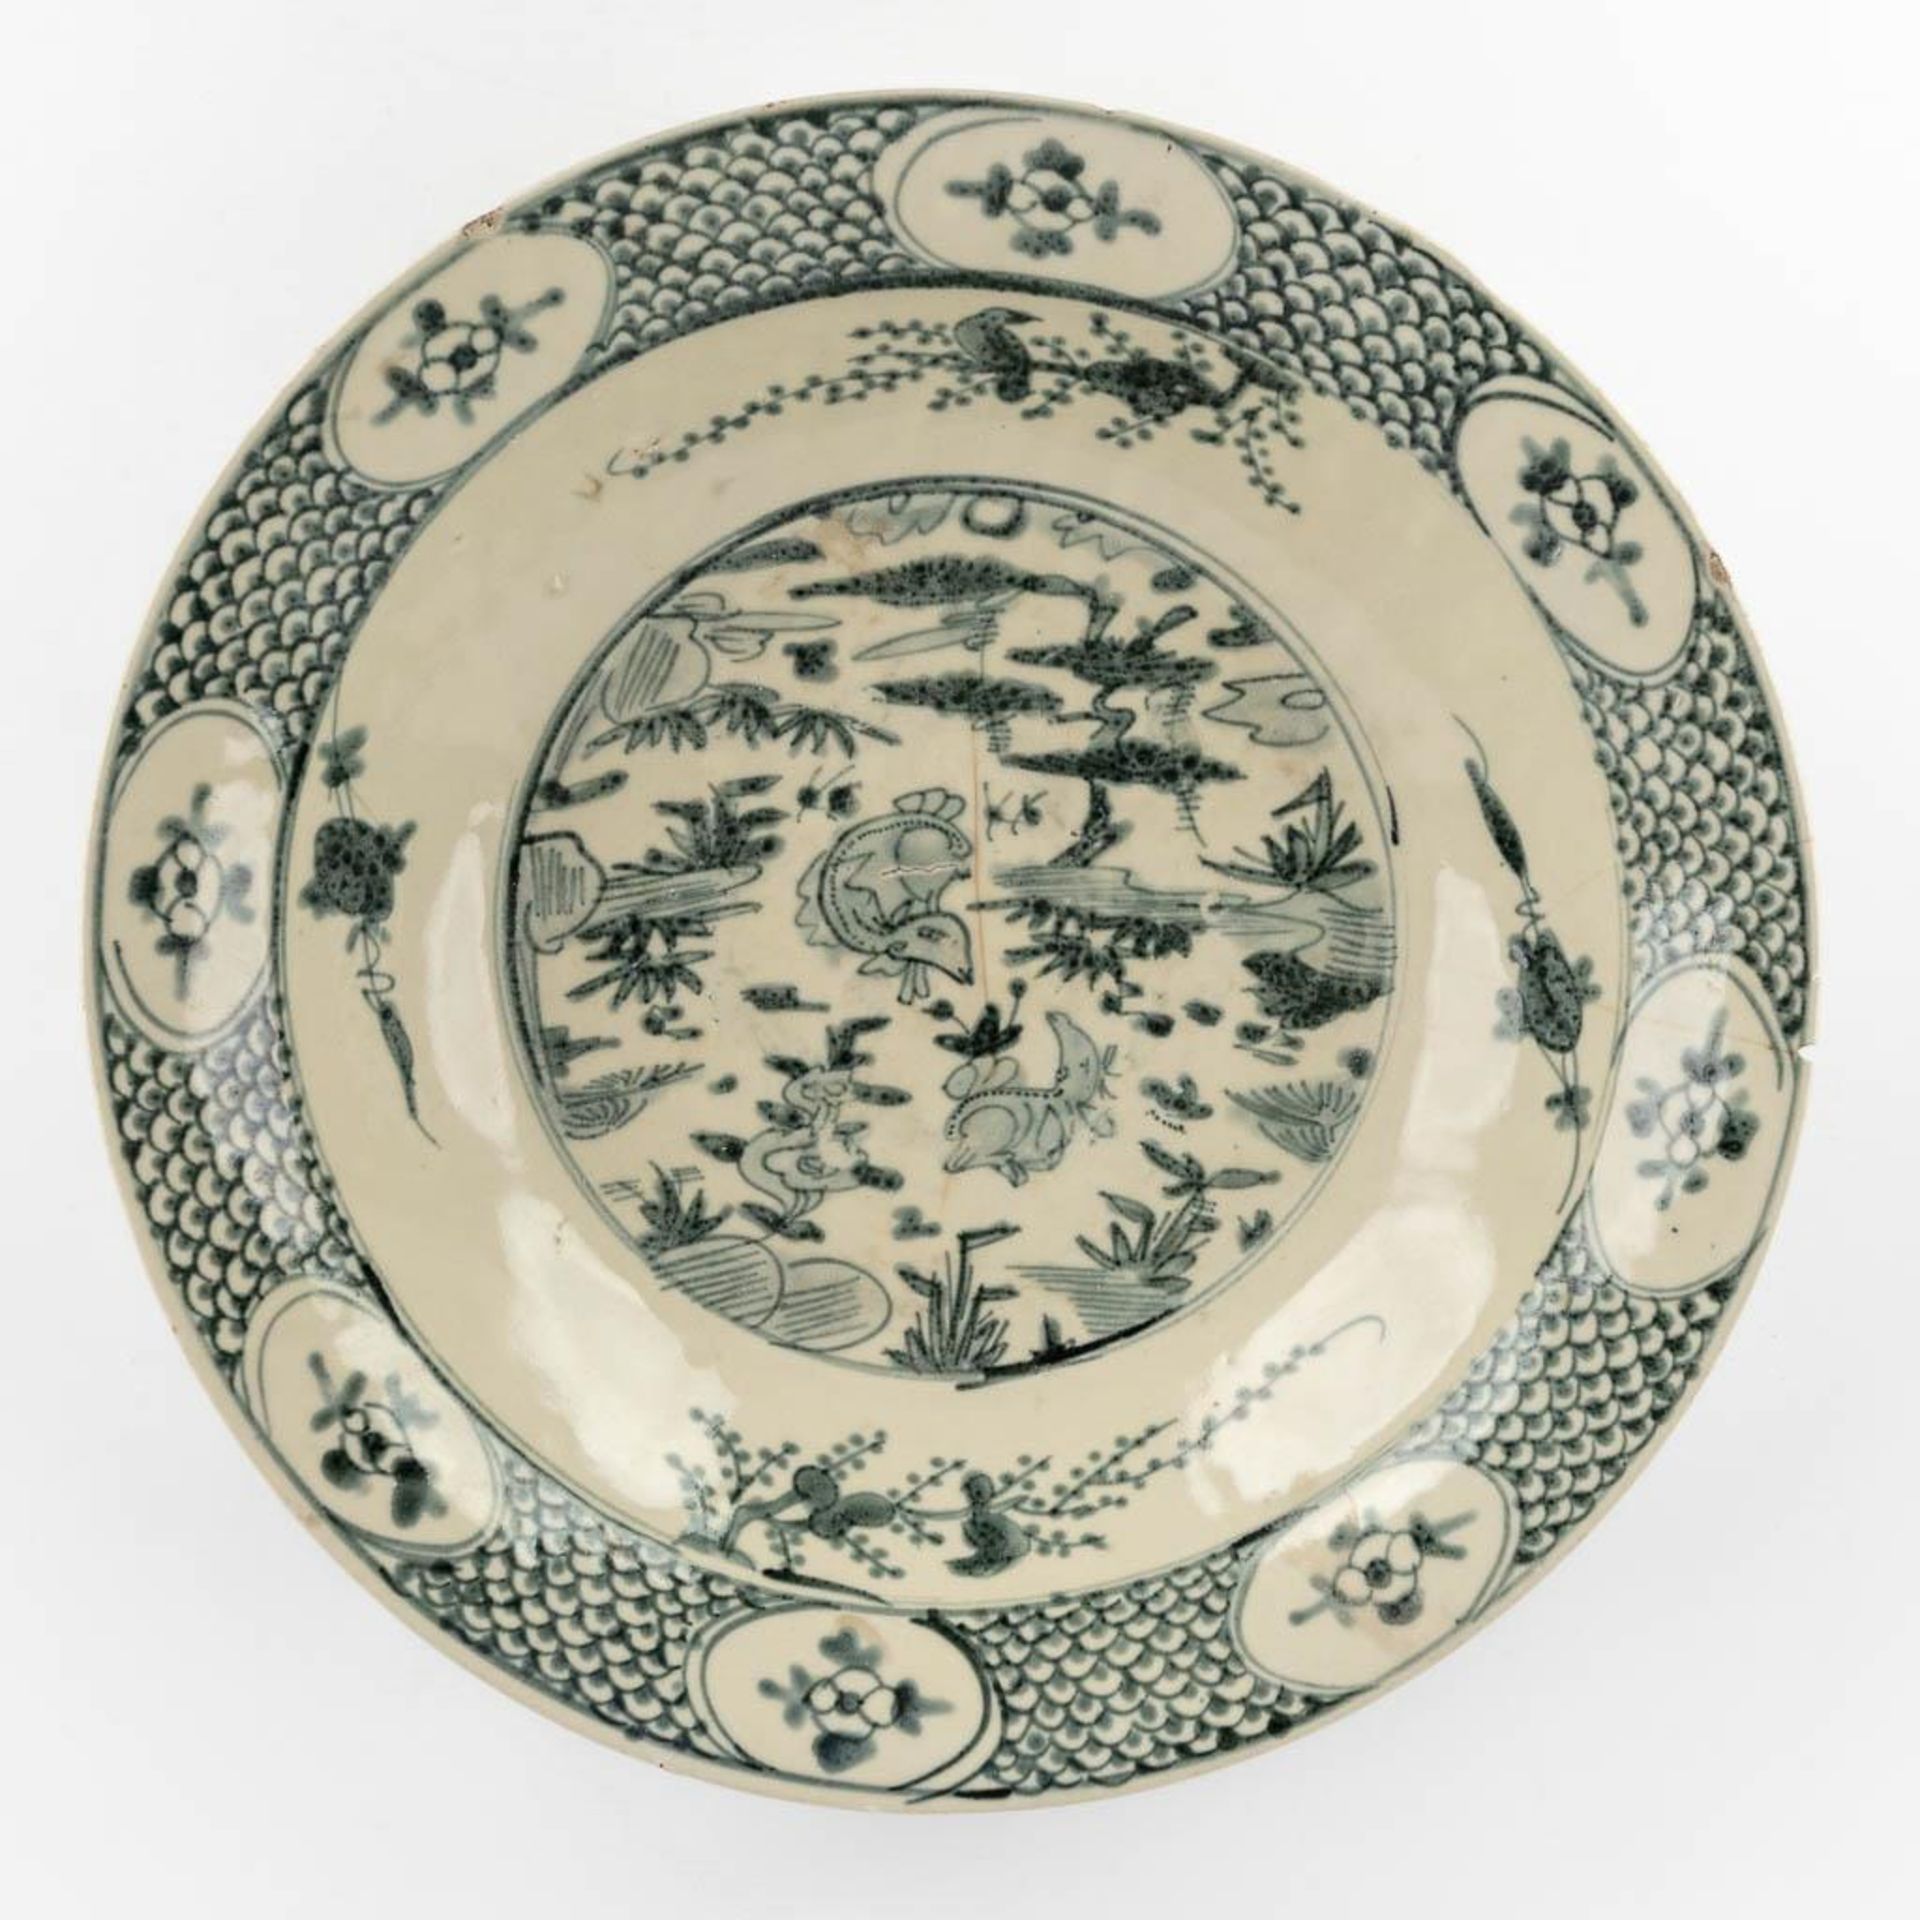 A large Chinese plate with blue-white decor 'Resting Deer'. (H:9 x D:39 cm)